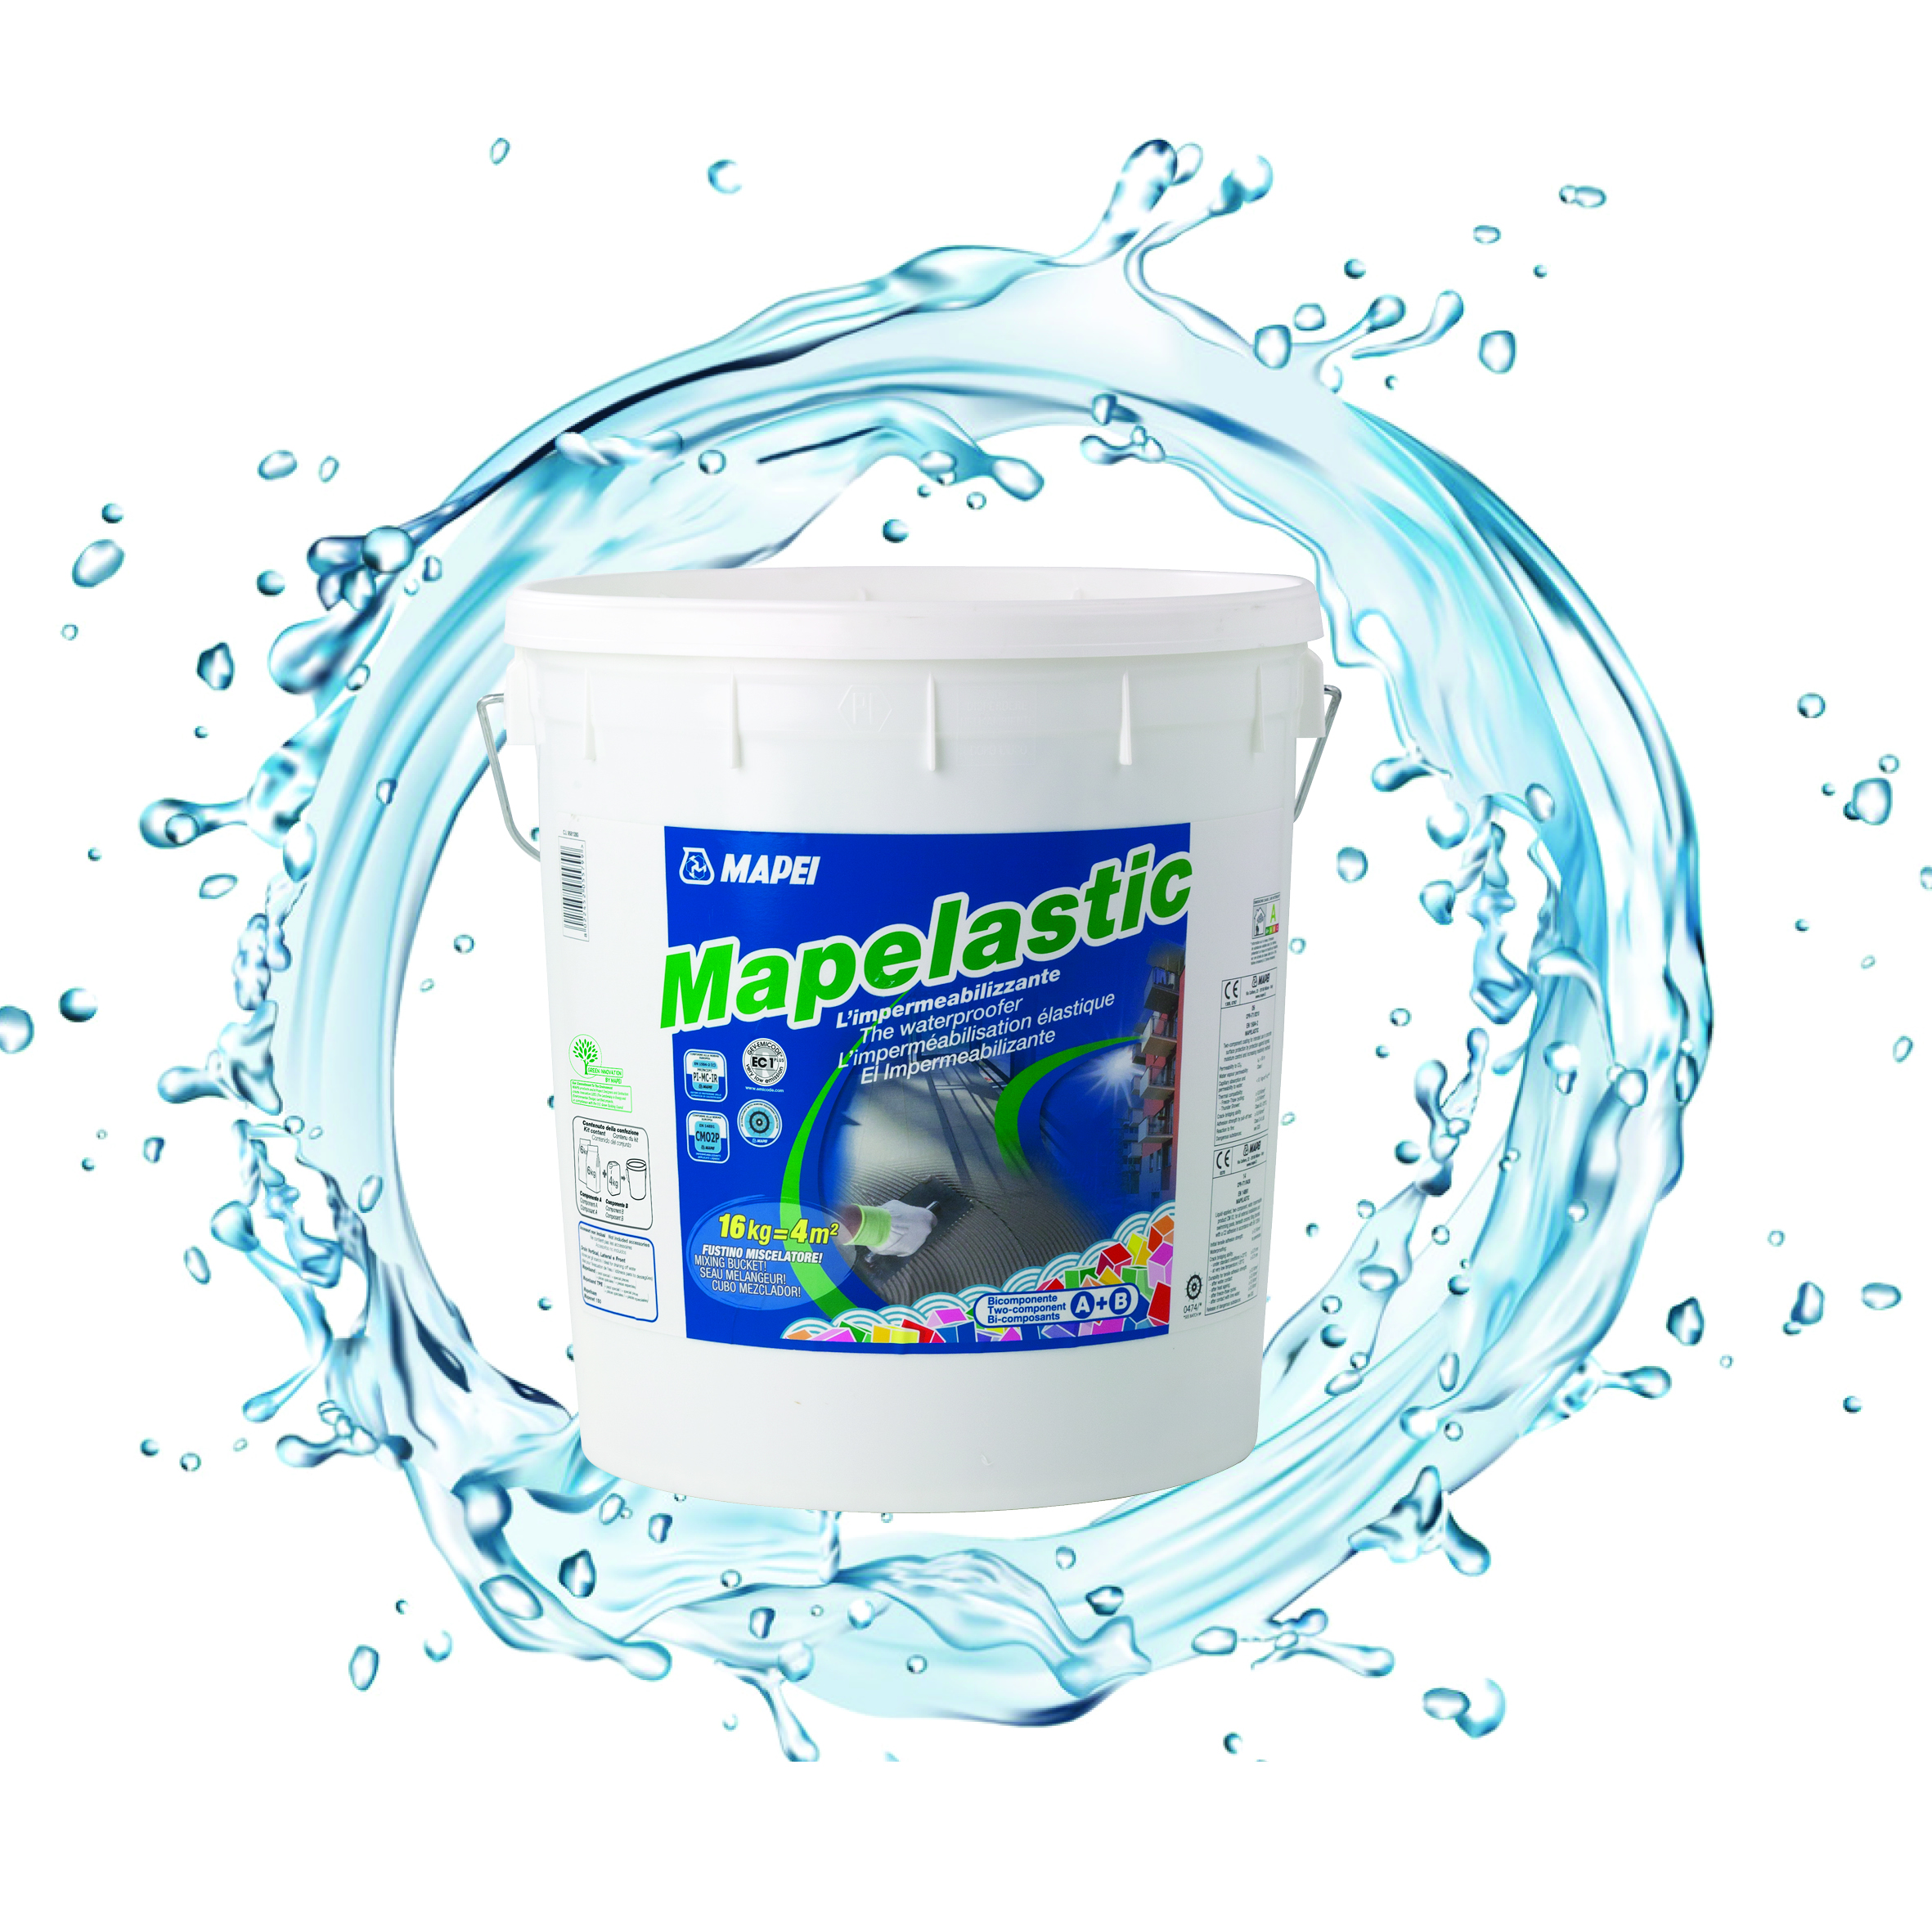 Waterproofing with MAPEI’s Mapelastic